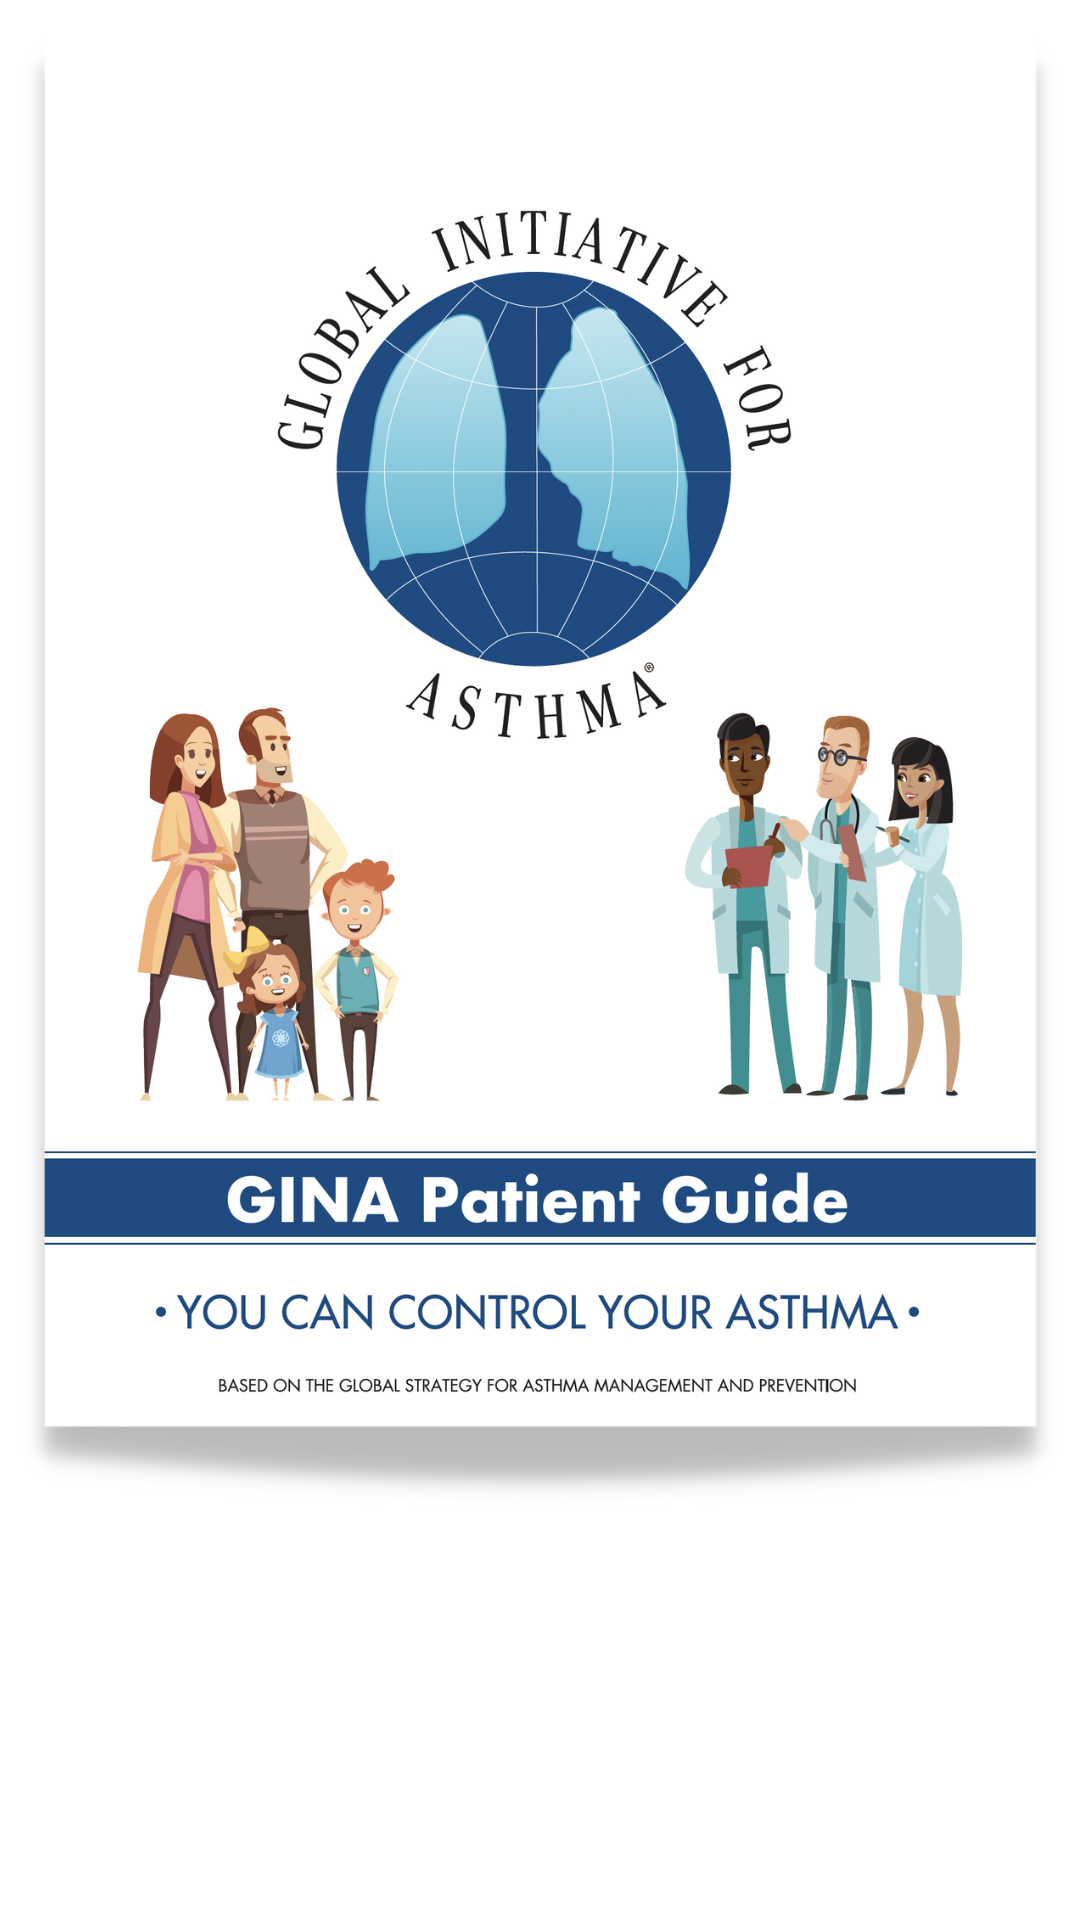 GINA Patient Guide for Asthma: You can control your asthma